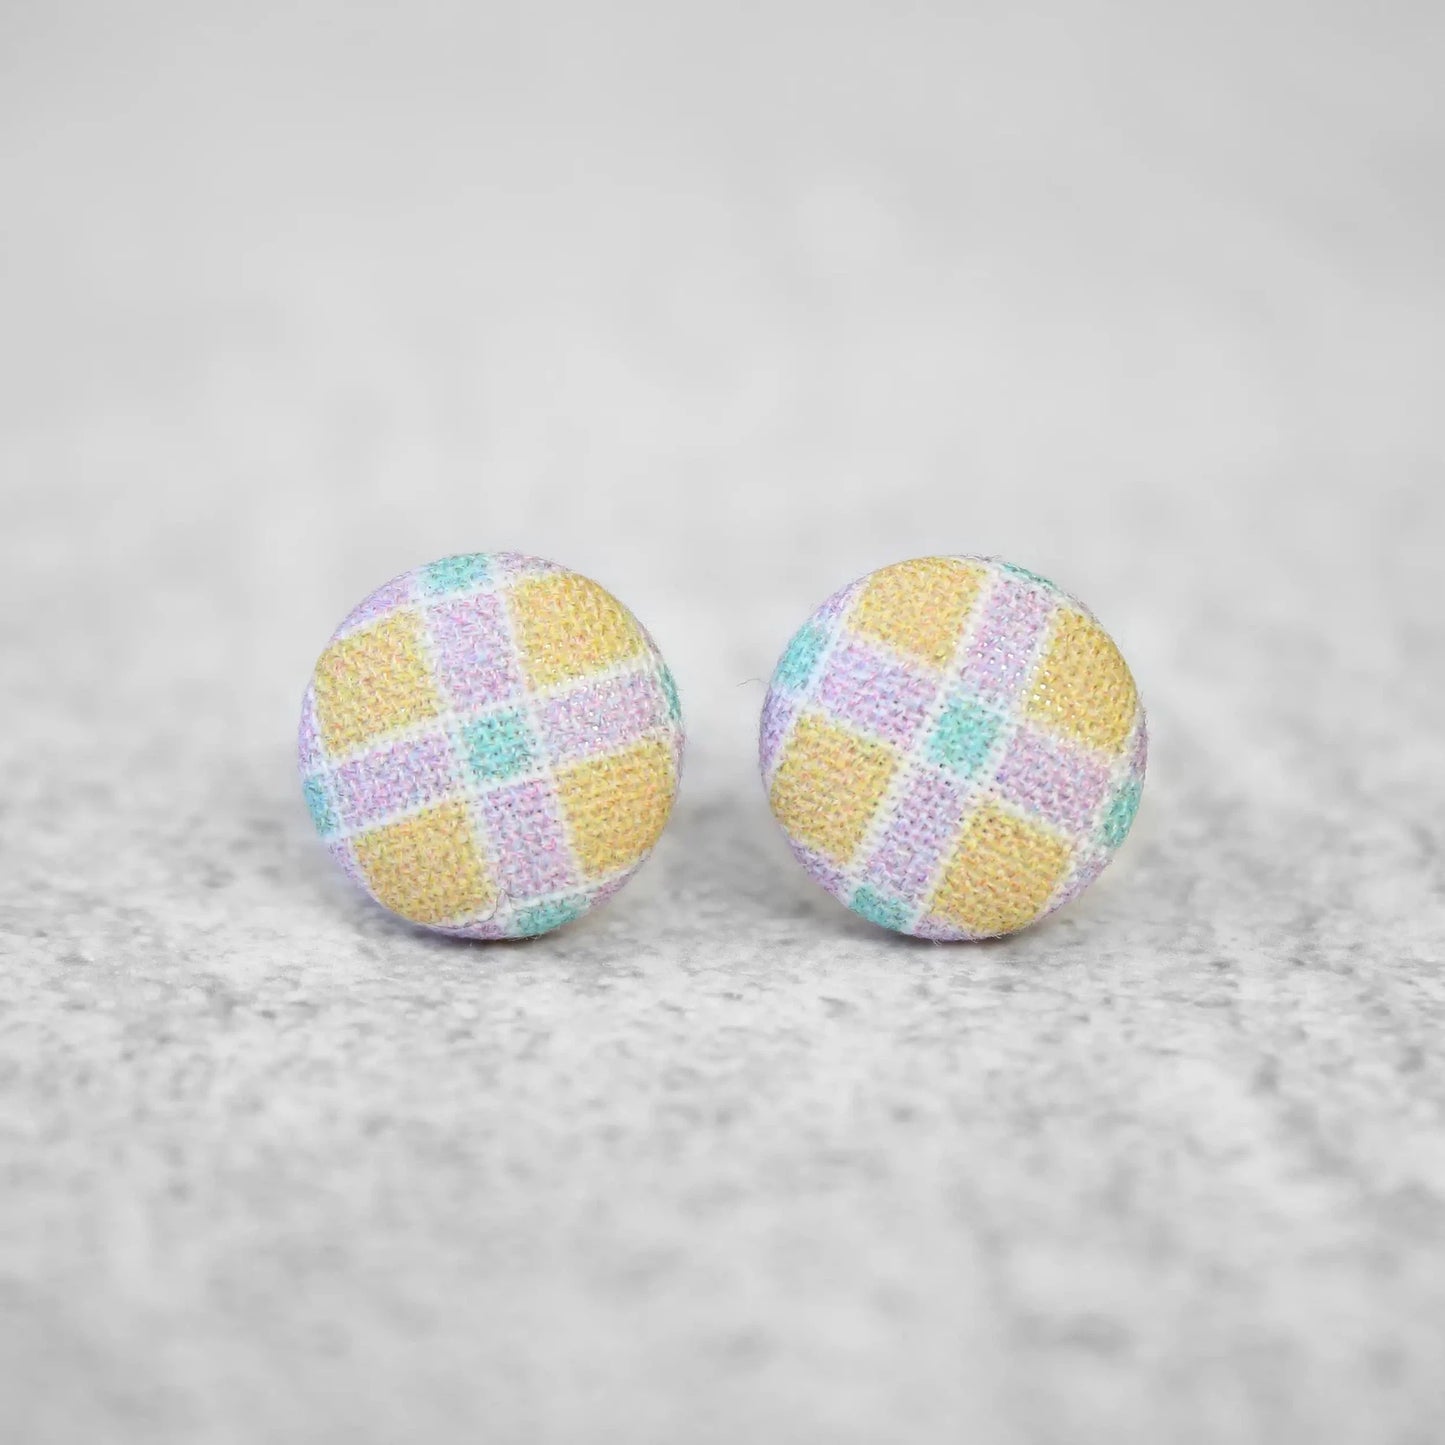 Pastel Plaid Fabric Button Earrings | Handmade in the US